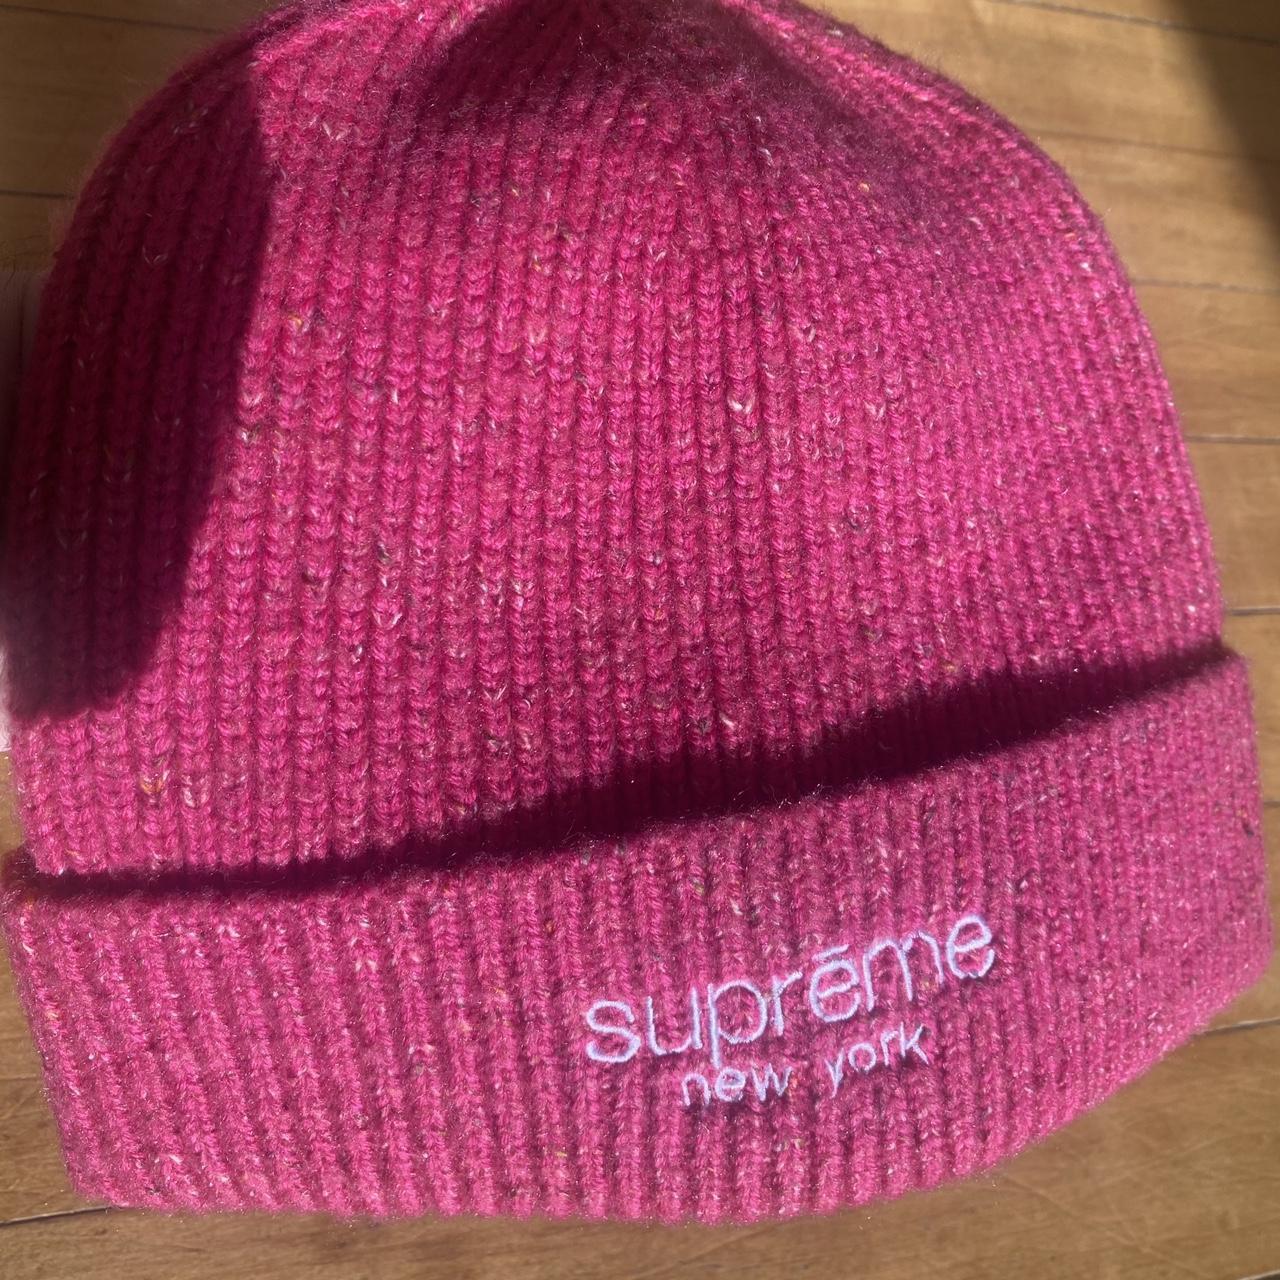 RED SUPREME USA BEANIE ✿no flaws ✿FREE TRACKED US - Depop